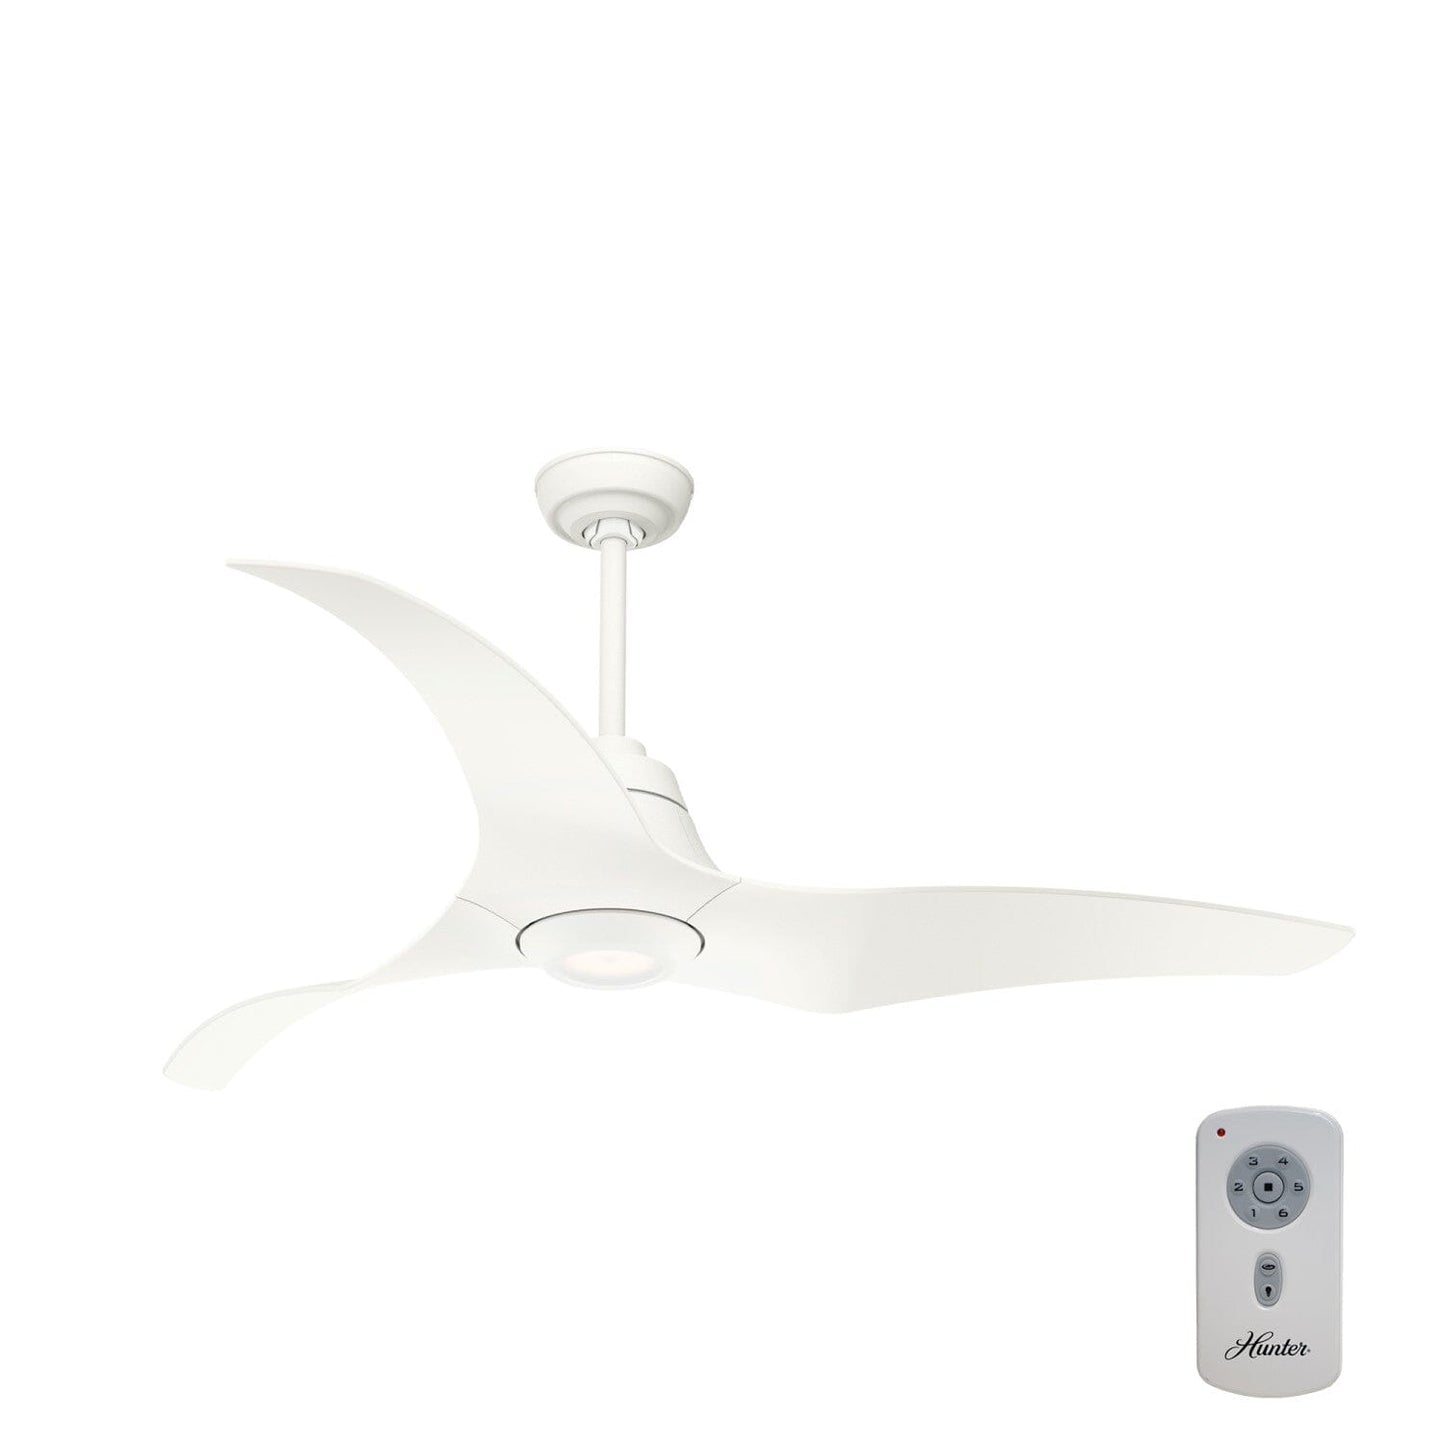 Stingray ENERGY STAR 60 inch with LED Light and Remote Control Ceiling Fans Casablanca Matte White - Matte White 